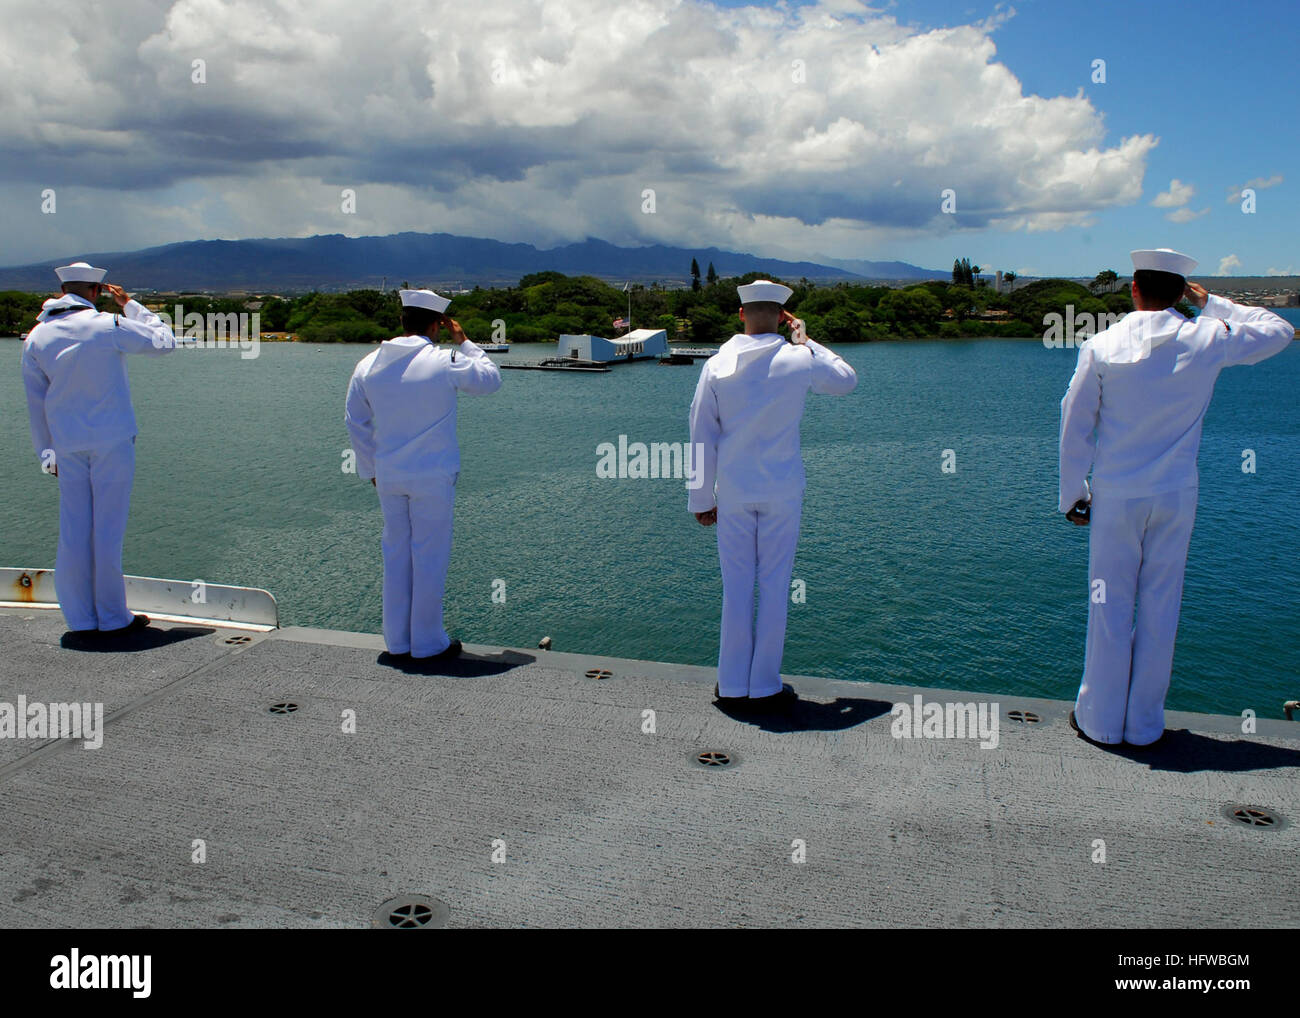 080801-N-2638R-003 PEARL HARBOR, Hawaii (Aug. 1, 2008) Sailors salute the USS Arizona Memorial from the flight deck of the aircraft carrier USS Kitty Hawk (CV 63) as the ship pulls out of Pearl Harbor after participating in Rim of the Pacific (RIMPAC) 2008. Kitty Hawk is the Navy's oldest active duty warship and will be replaced this summer by the nuclear-powered aircraft carrier USS George Washington (CV 73) as the Navy's only permanently forward-deployed aircraft carrier. (U.S. Navy photo by Mass Communication Specialist 3rd Class Bryan Reckard/Released) US Navy 080801-N-2638R-003 Sailors sa Stock Photo